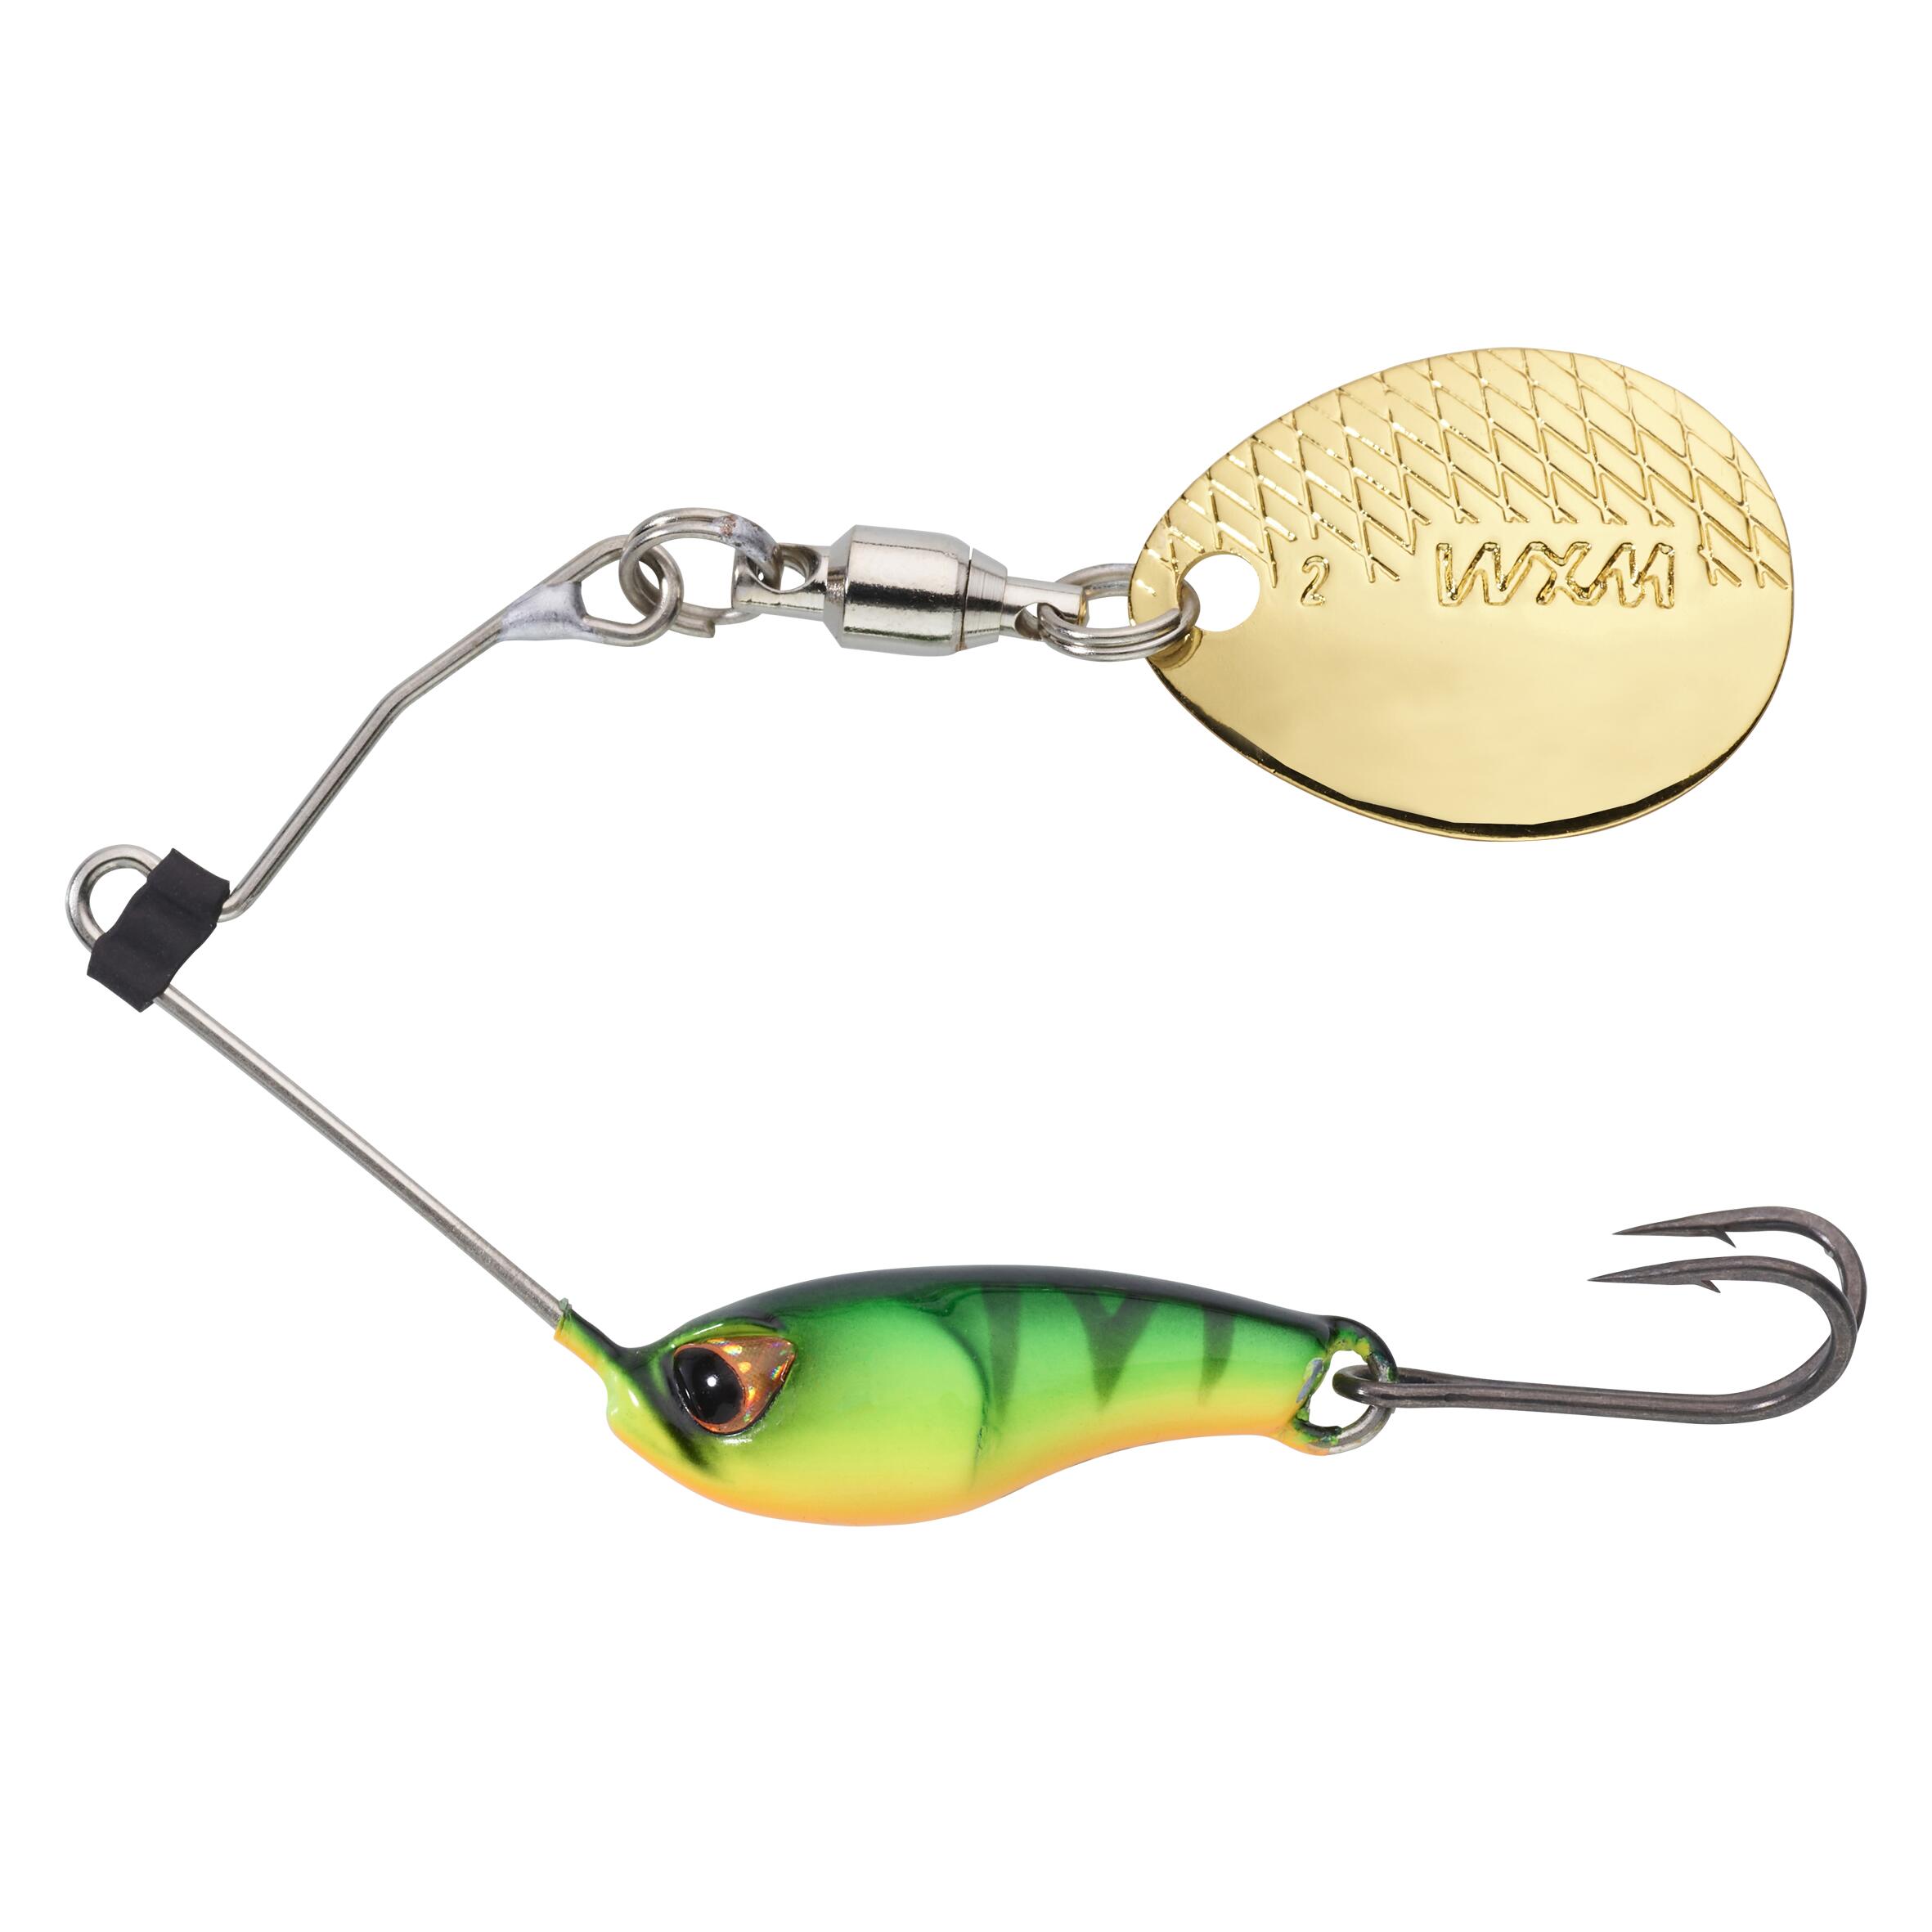 Decathlon | Micro-spinnerbait SPINO MCO 5g fire tiger |  Caperlan